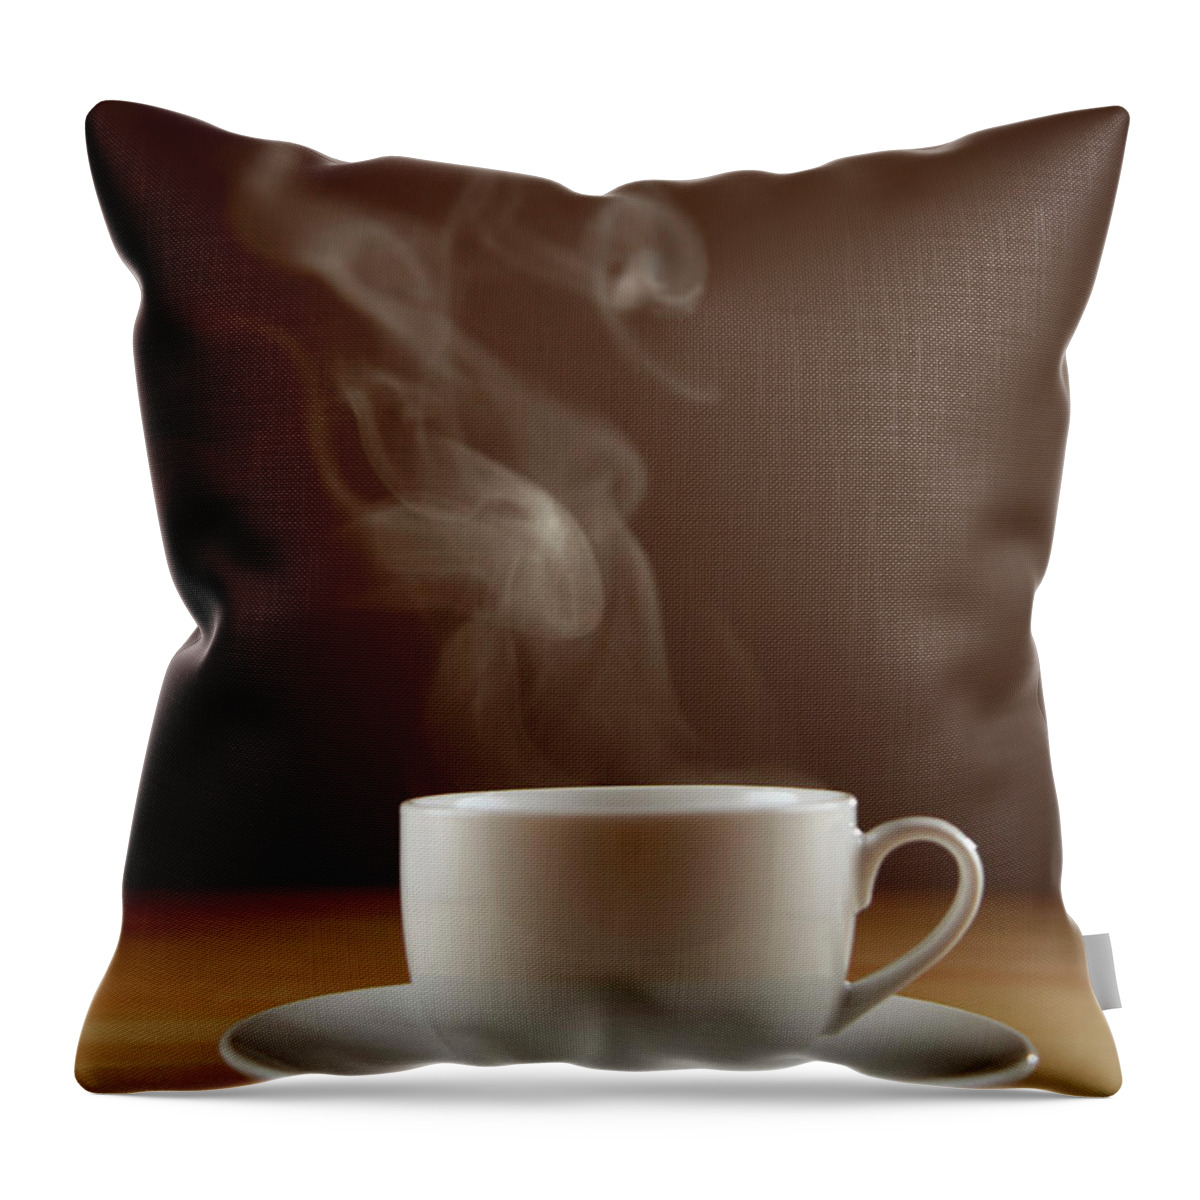 Black Tea Throw Pillow featuring the photograph Coffee Series by Peepo